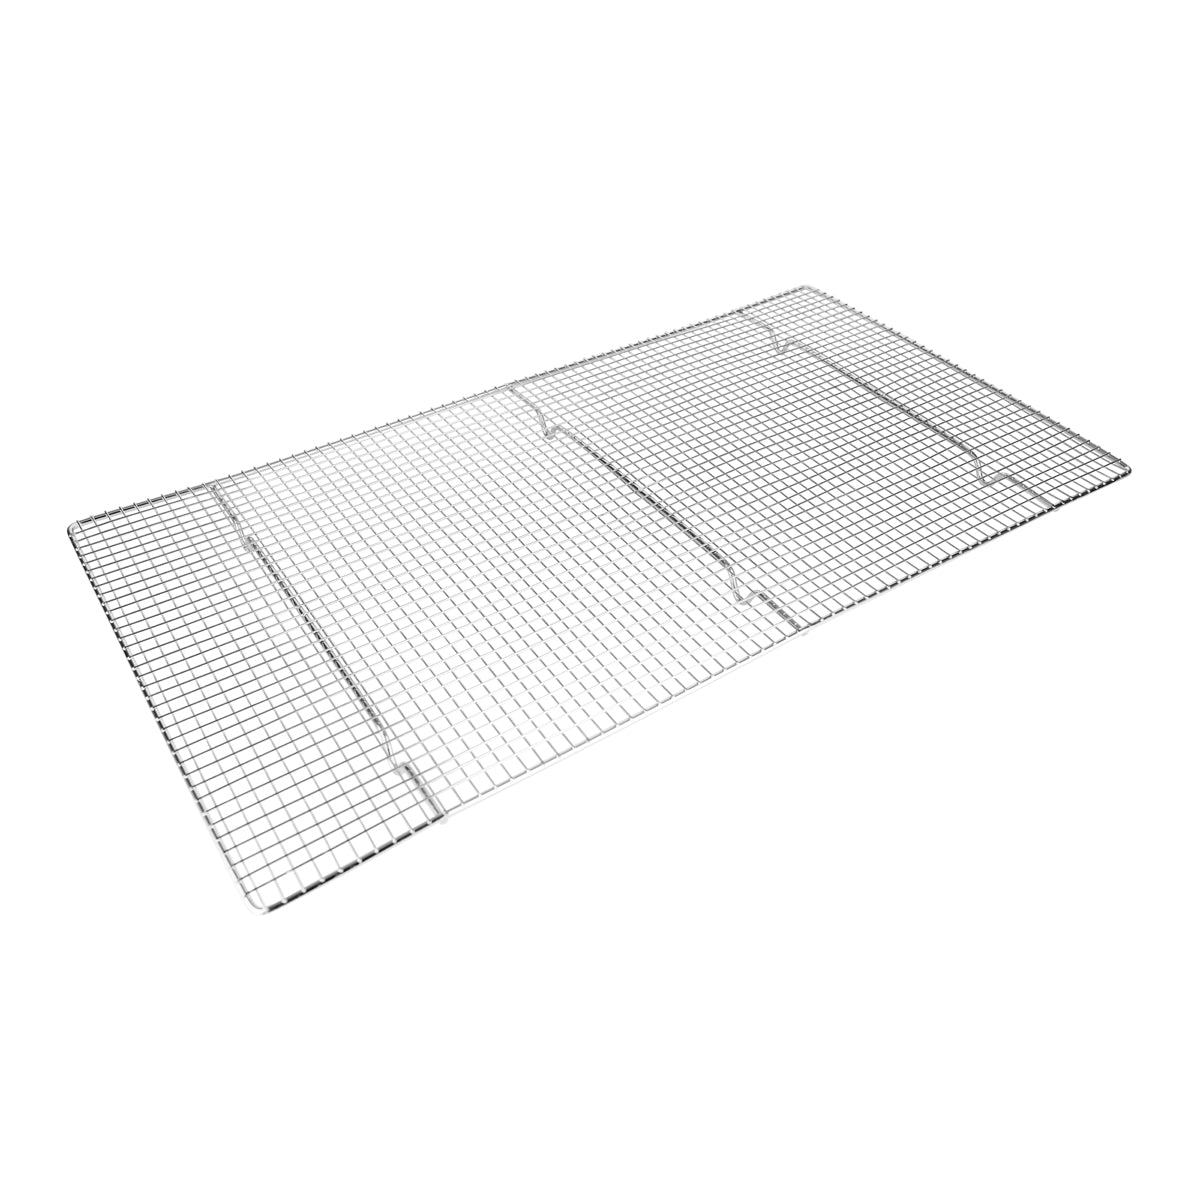 10320 Chef Inox Cooling Rack with Legs 740x400mm Tomkin Australia Hospitality Supplies